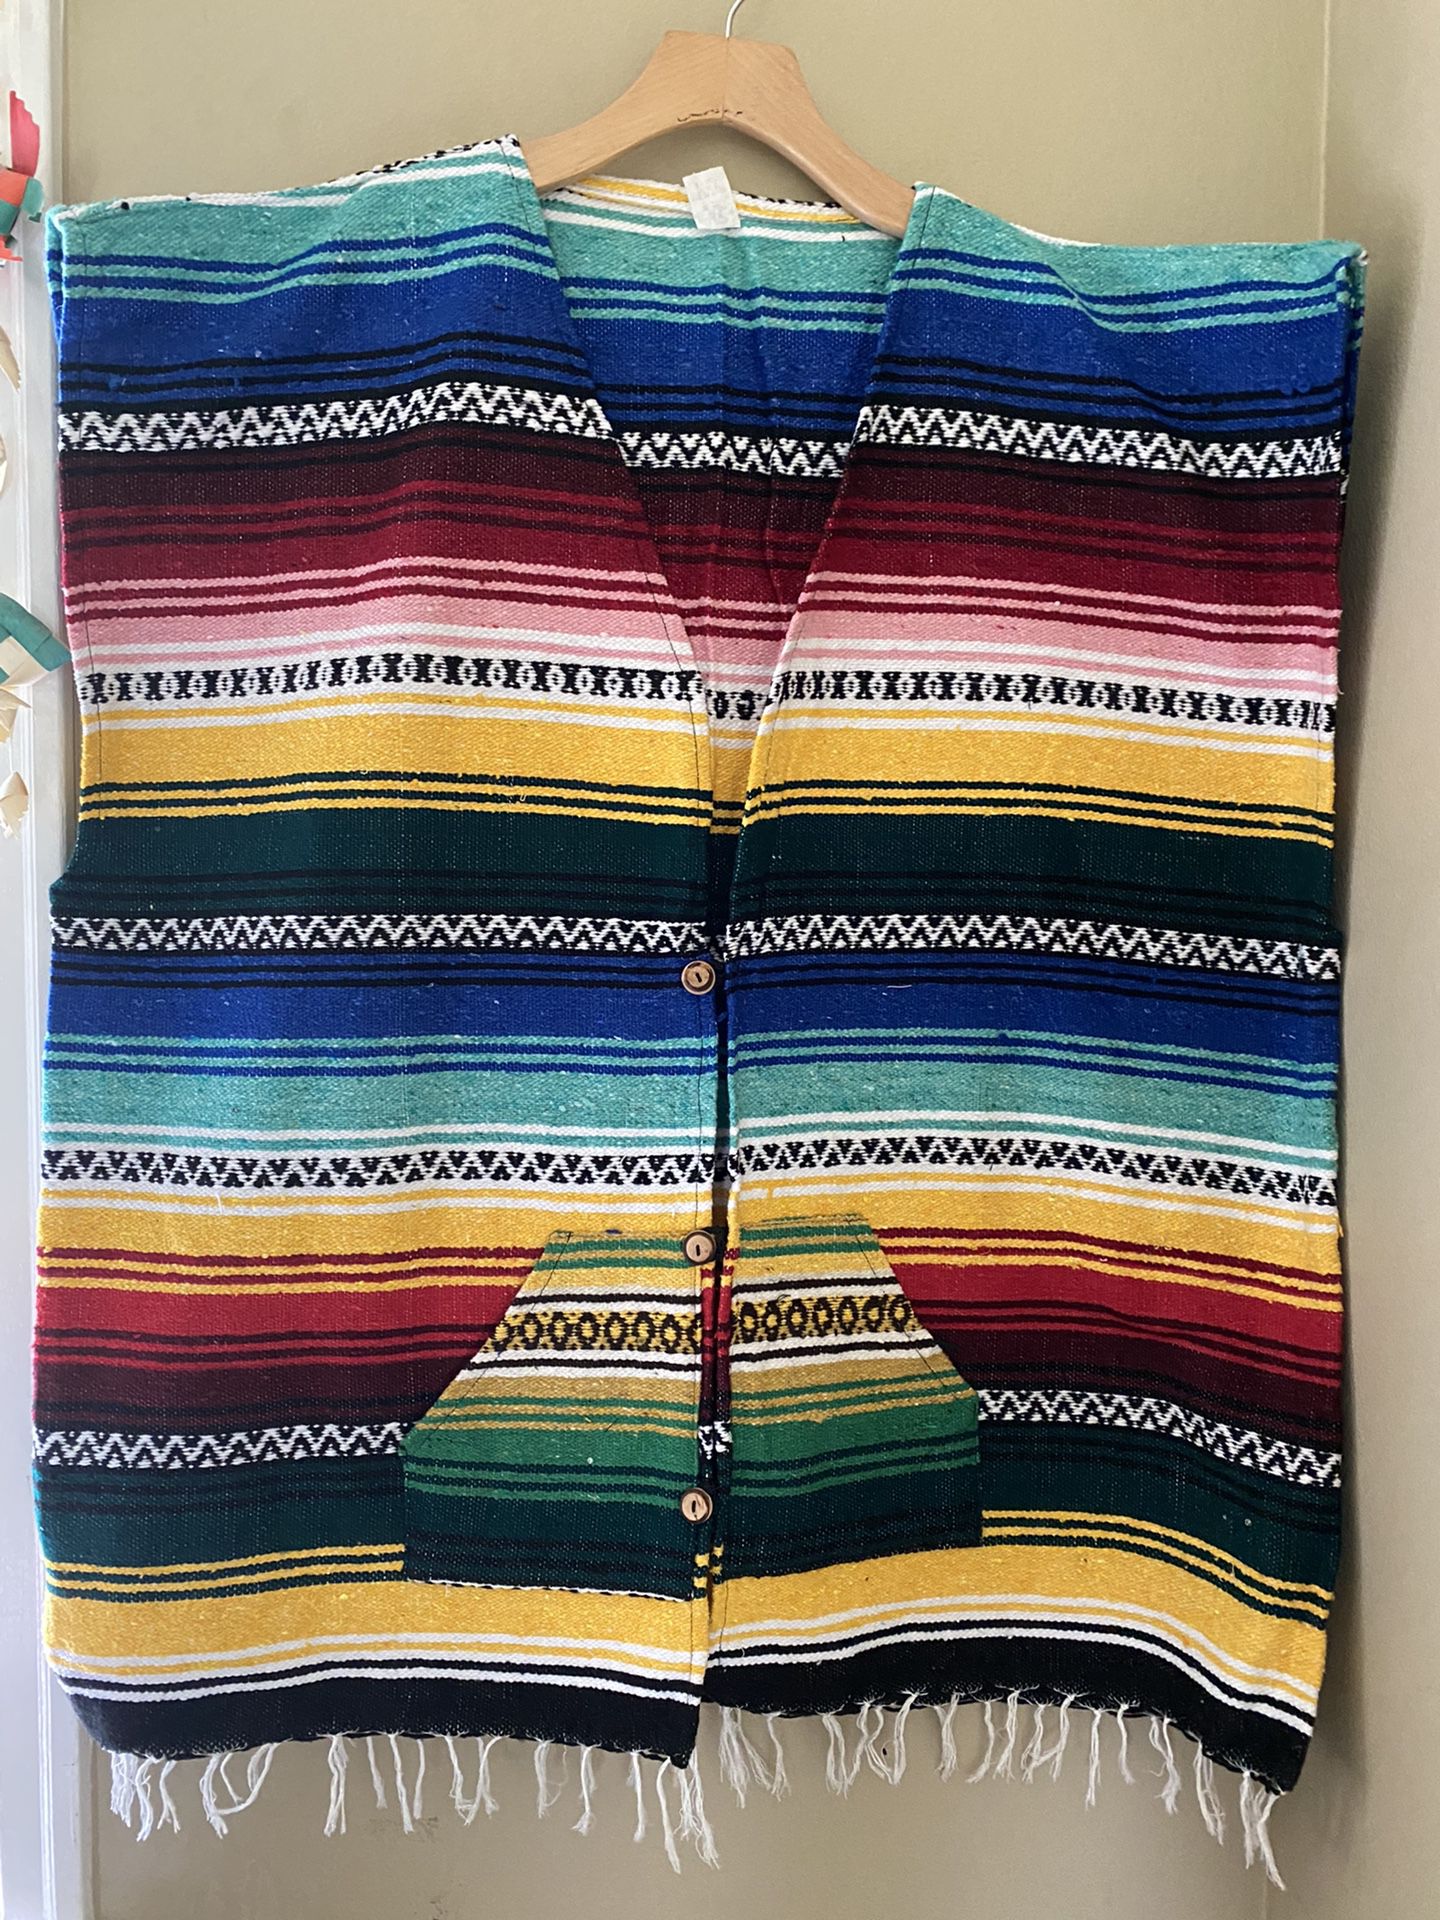 Colorful Striped Mexican Blanket Poncho VEST #5 western cowboy costume XXL 2X